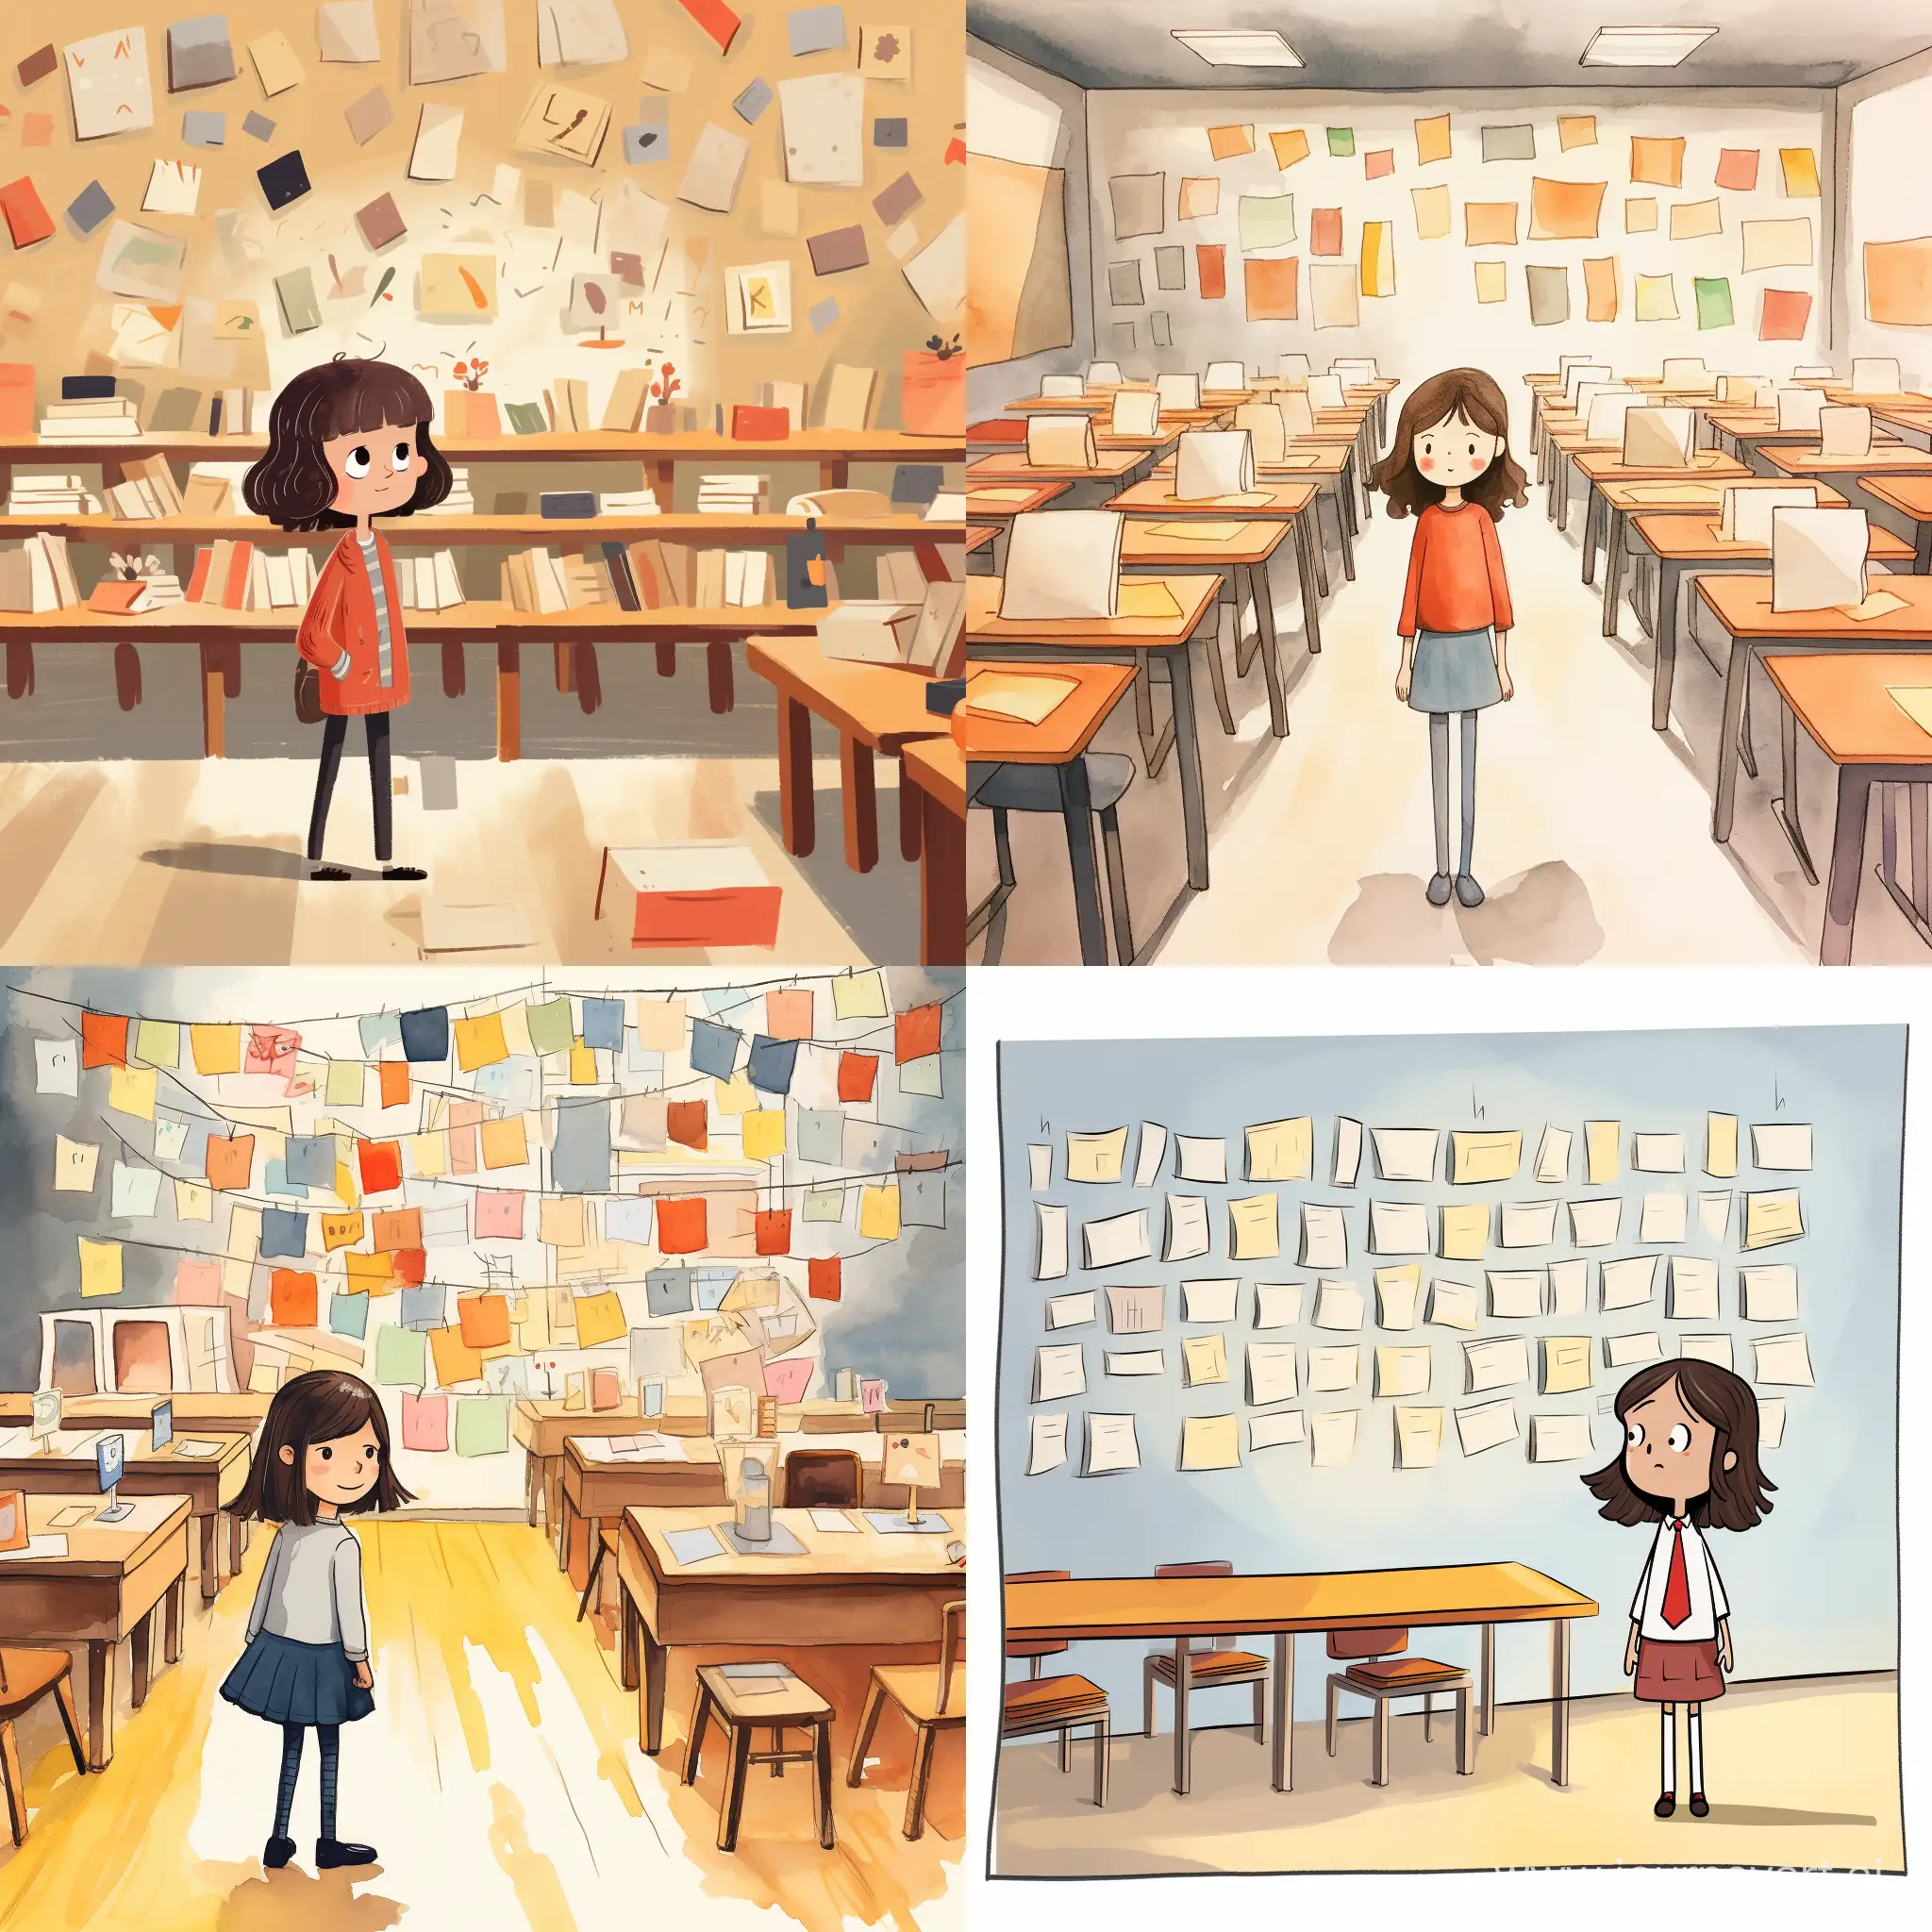 delightful heartwarming sketchbook of a little cheeky girl standing in a modern classroom with two rows of desks that are very cluttered with some papers flying around. The colors are flat and the drawing is very simplistic and childlike, but should reflect style and clothing of the year 2023